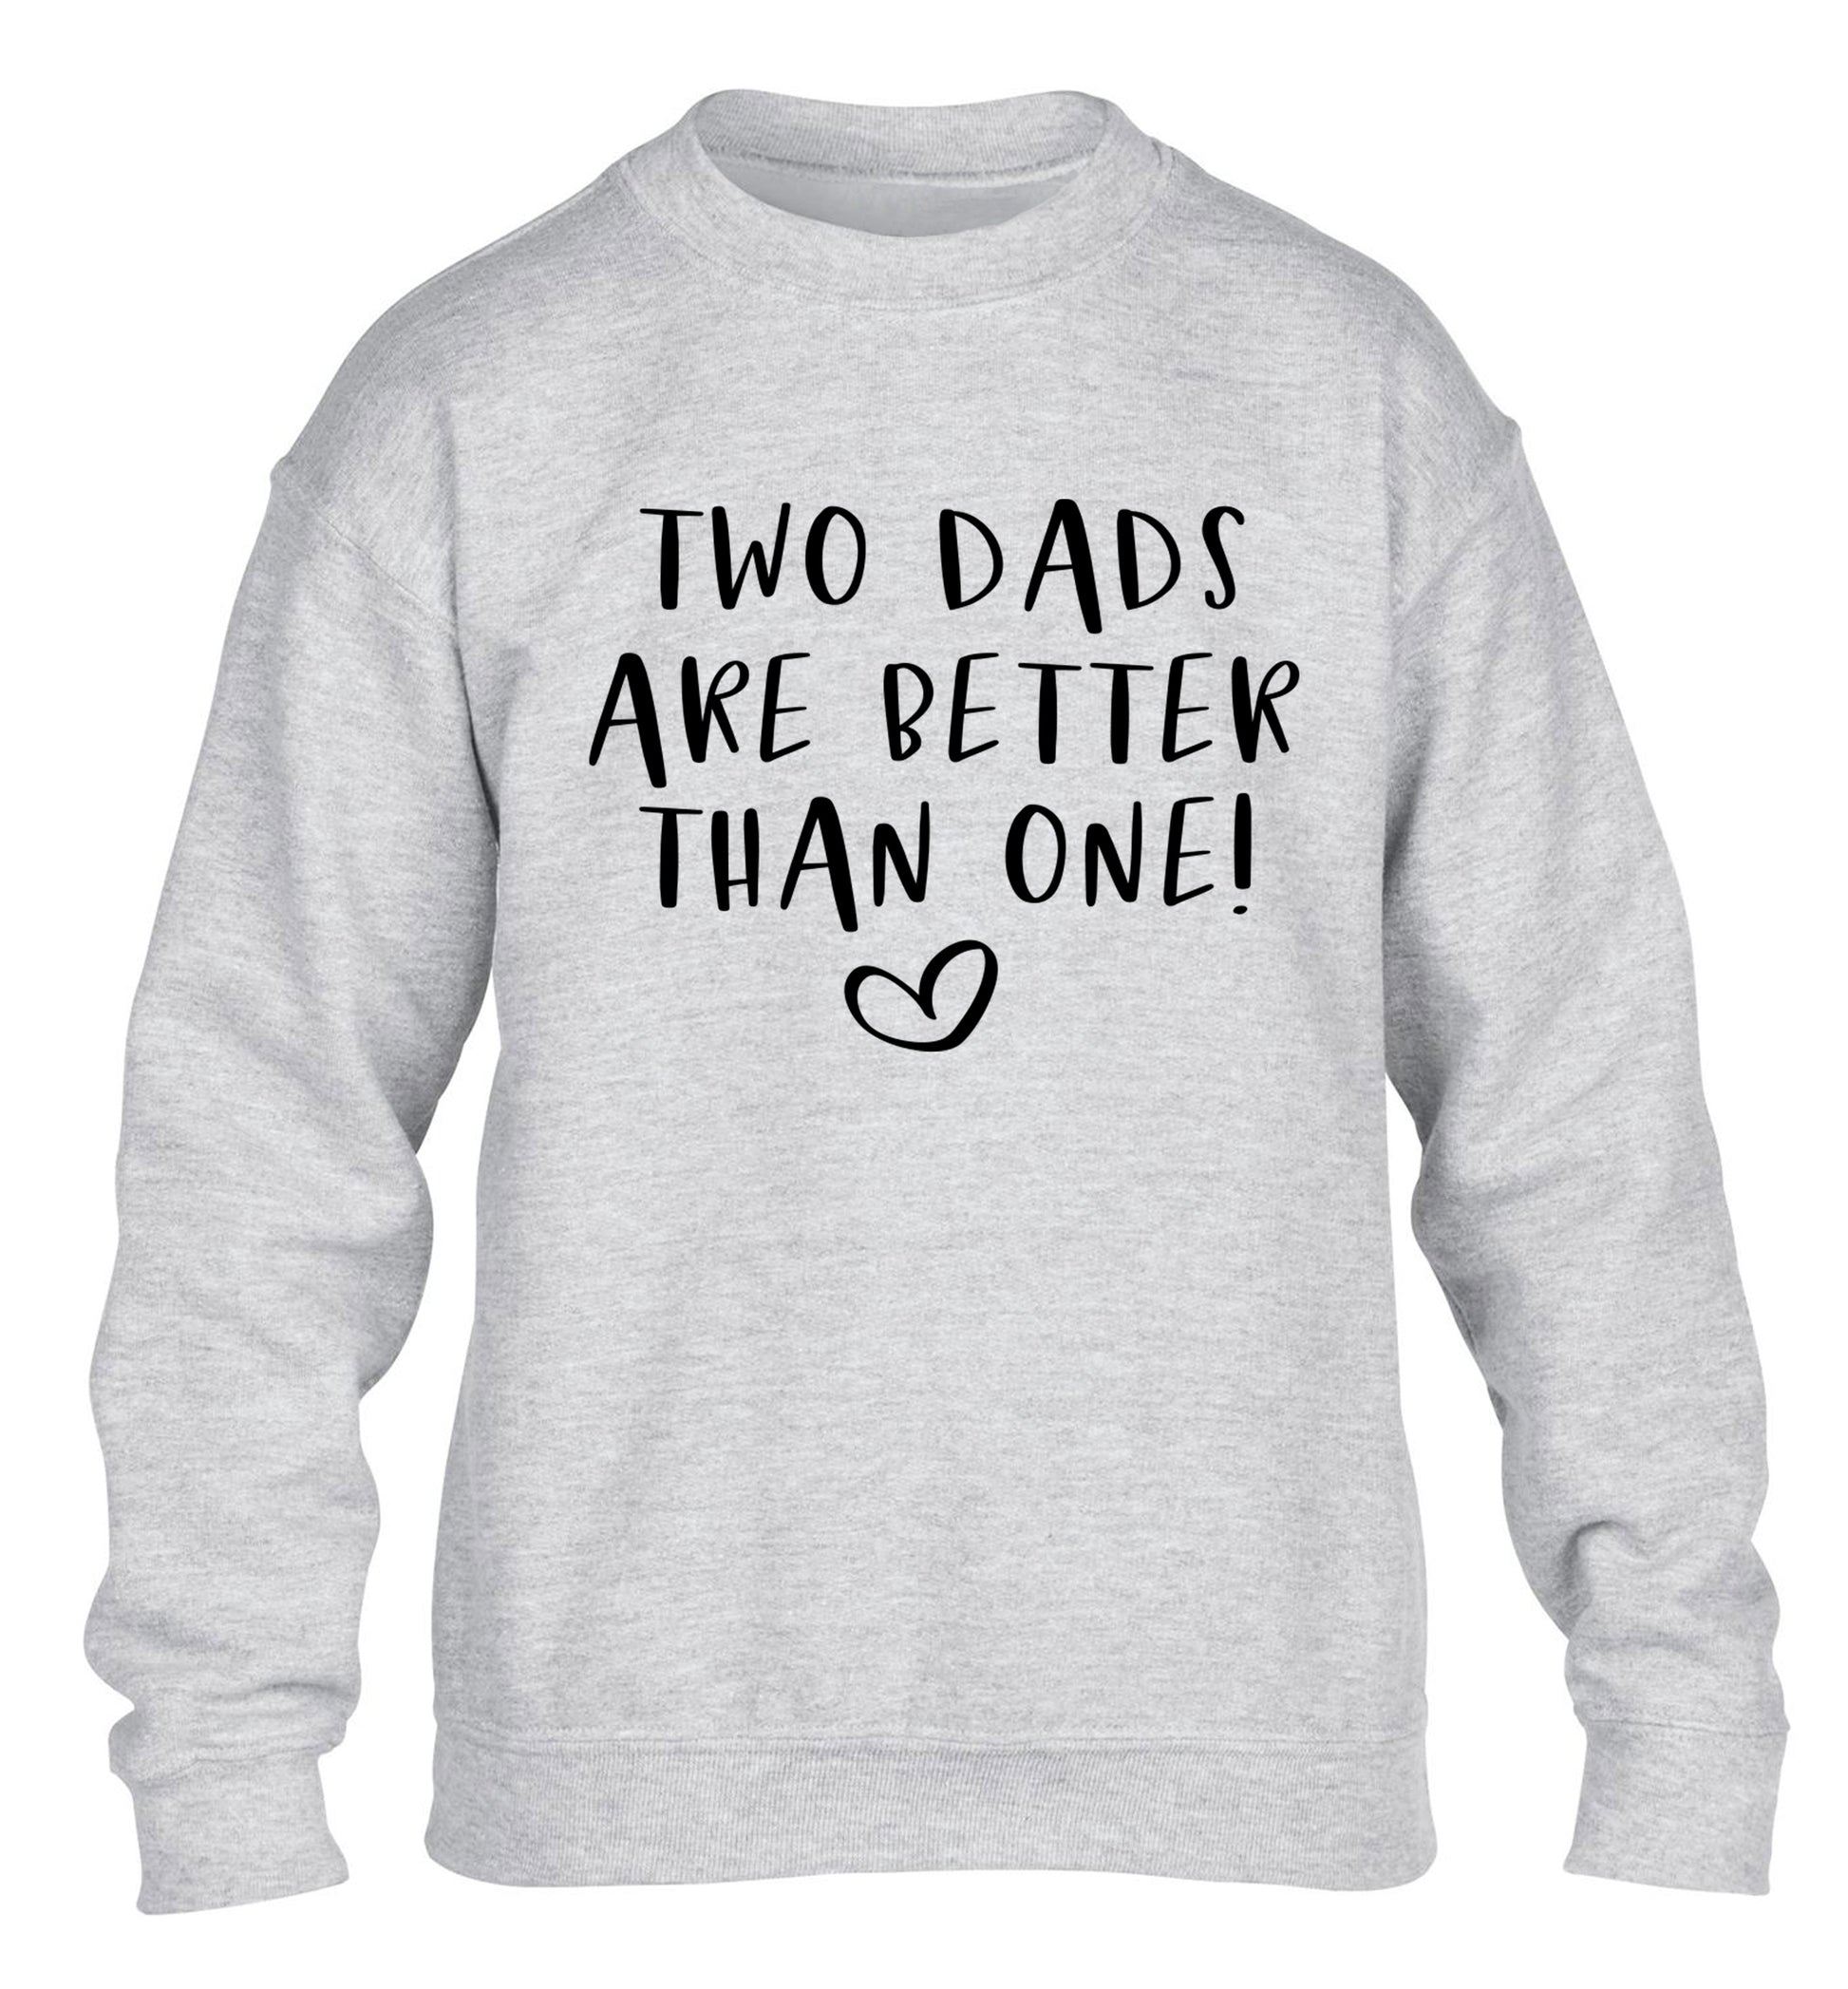 Two dads are better than one children's grey sweater 12-13 Years